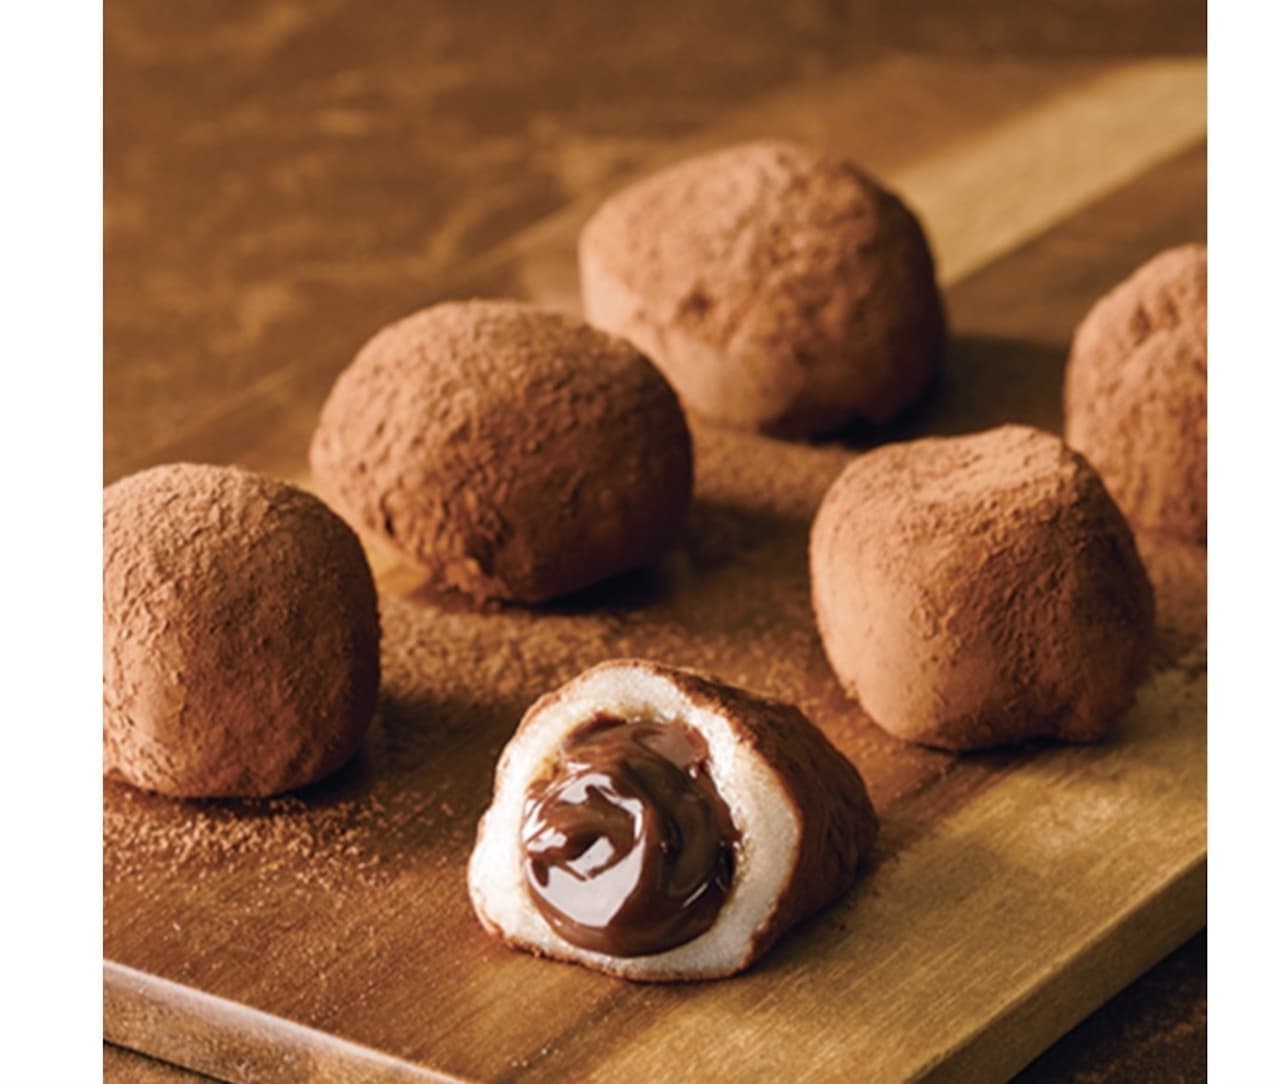 Chateraise "Chilled Fresh Chocolate Daifuku in a Cup